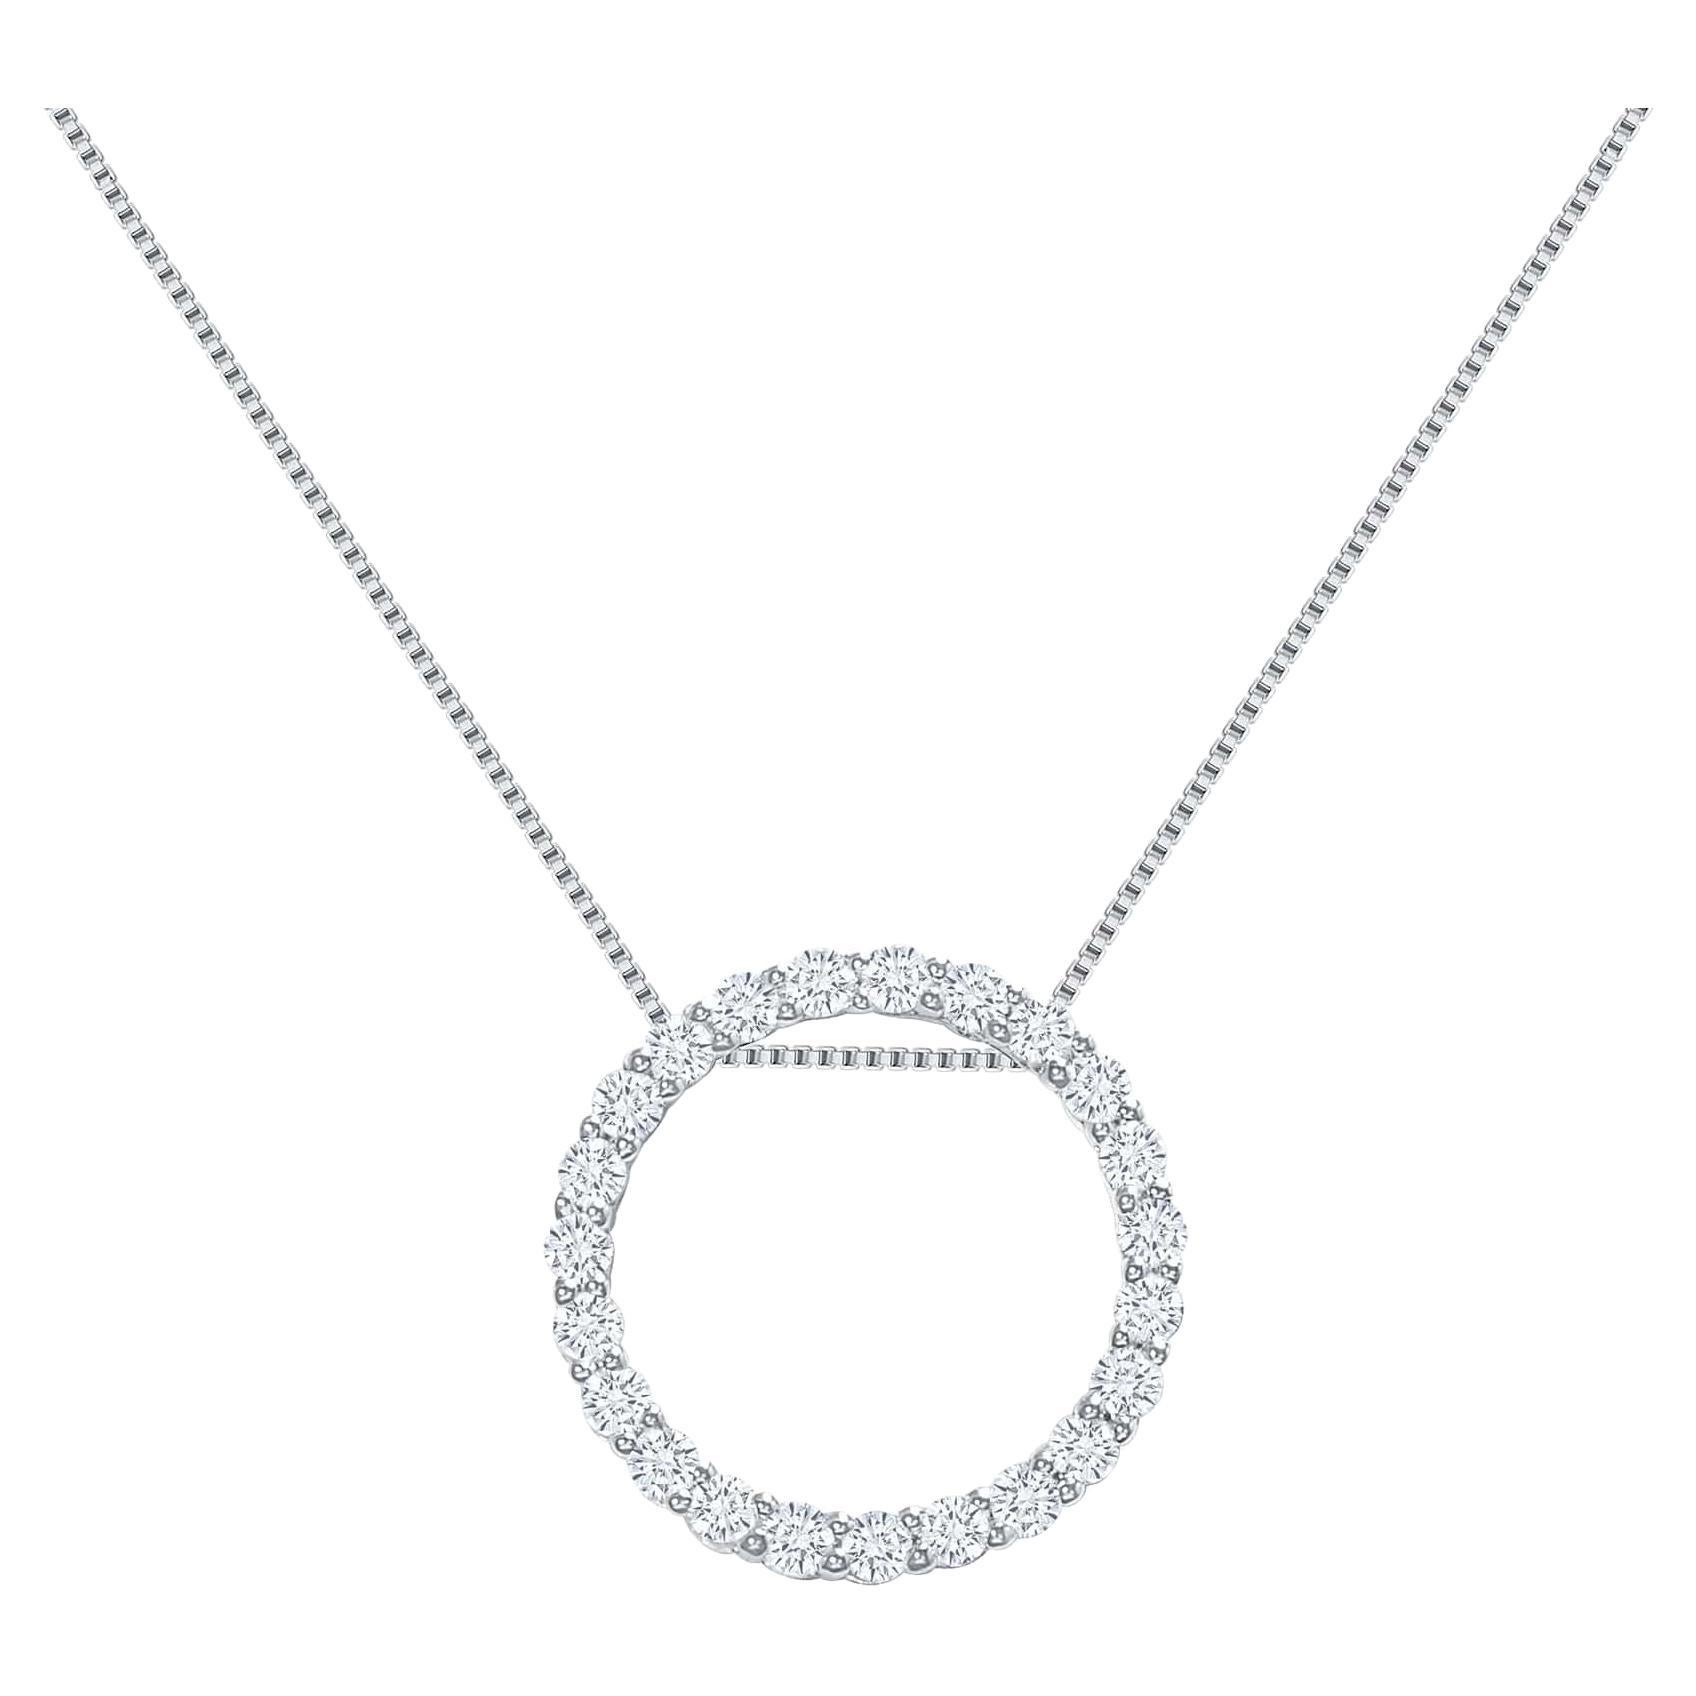 This diamond circle pendant provides a glowing chic look.

Necklace Information
Metal : 14k Gold
Diamond Total Carats : 1ct
Diamond Cut : Round Natural Diamonds
Diamond Clarity : VS
Diamond Color : F-G
Color : White Gold, Yellow Gold, Rose